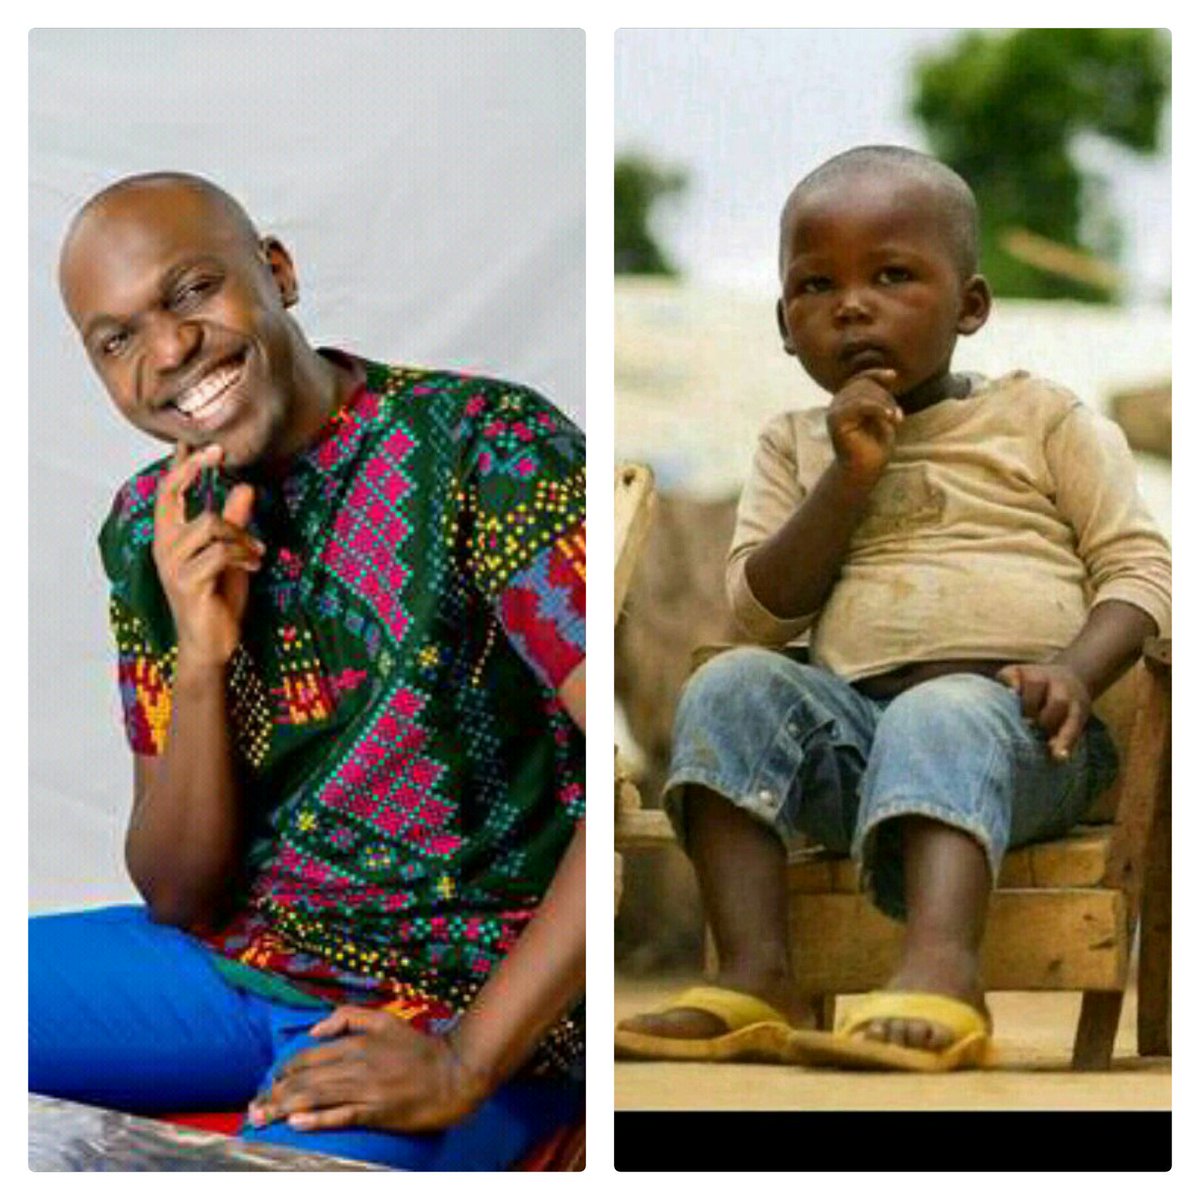 Candidates after the  Mock Exam vs after KCPE results
 
#KCPEResults
 Developing Story
#MarafikiMilele 
#NewsCentre
 #KCPE2017
#KCPE2017Results